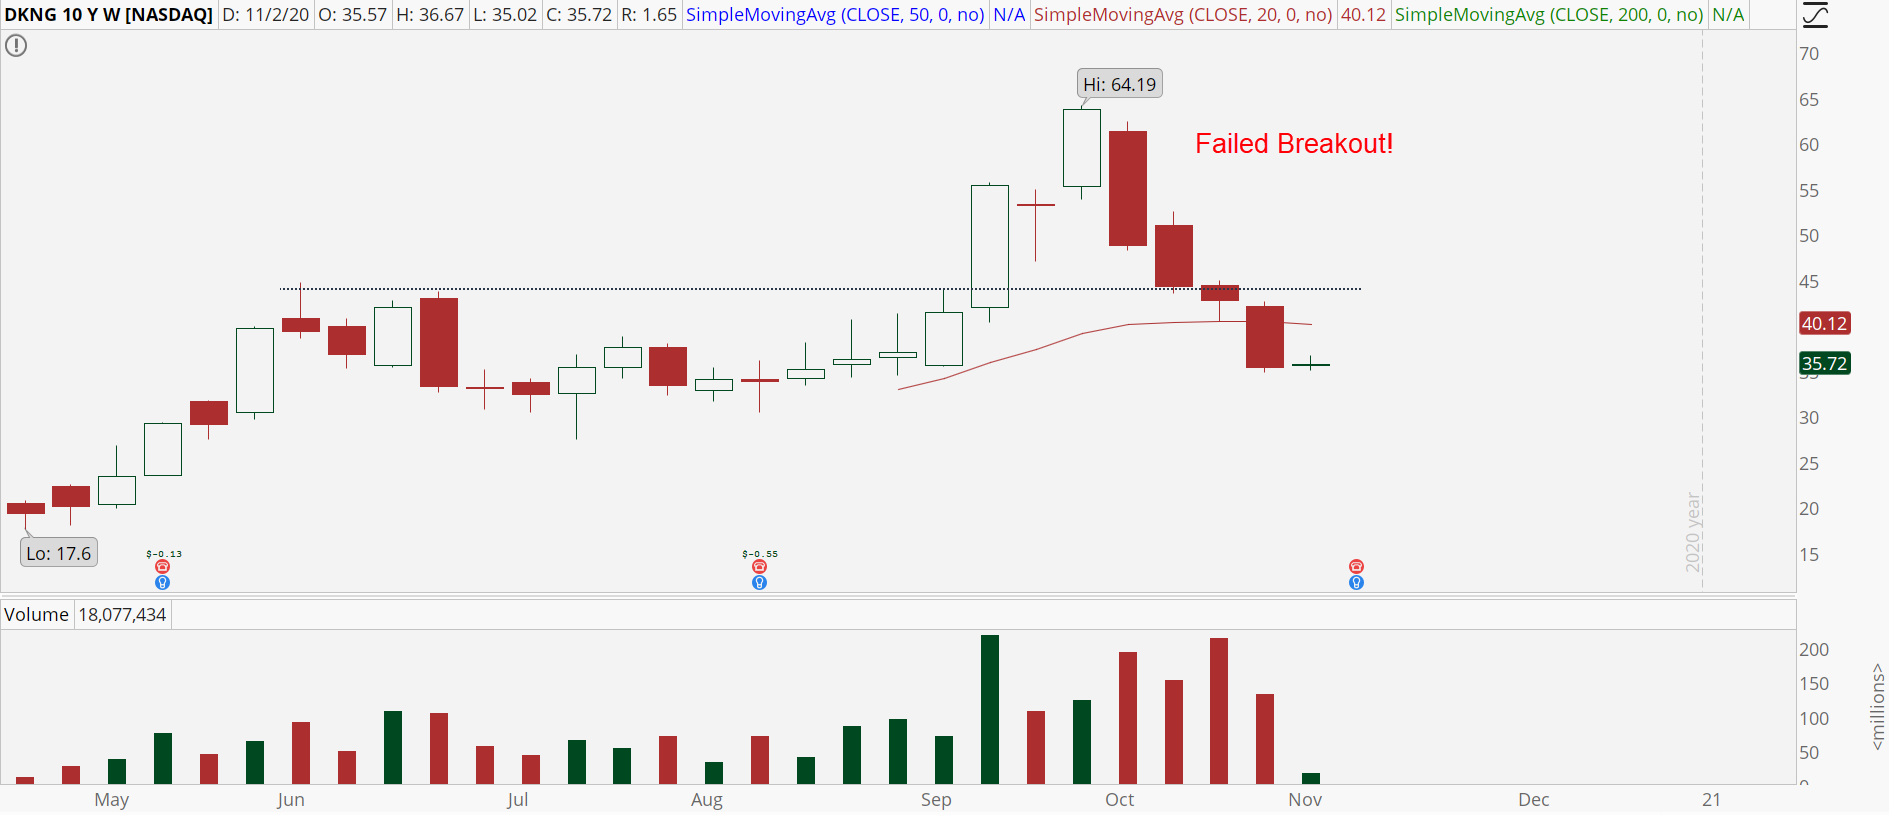 DraftKings (DKNG) weekly chart showing failed breakout